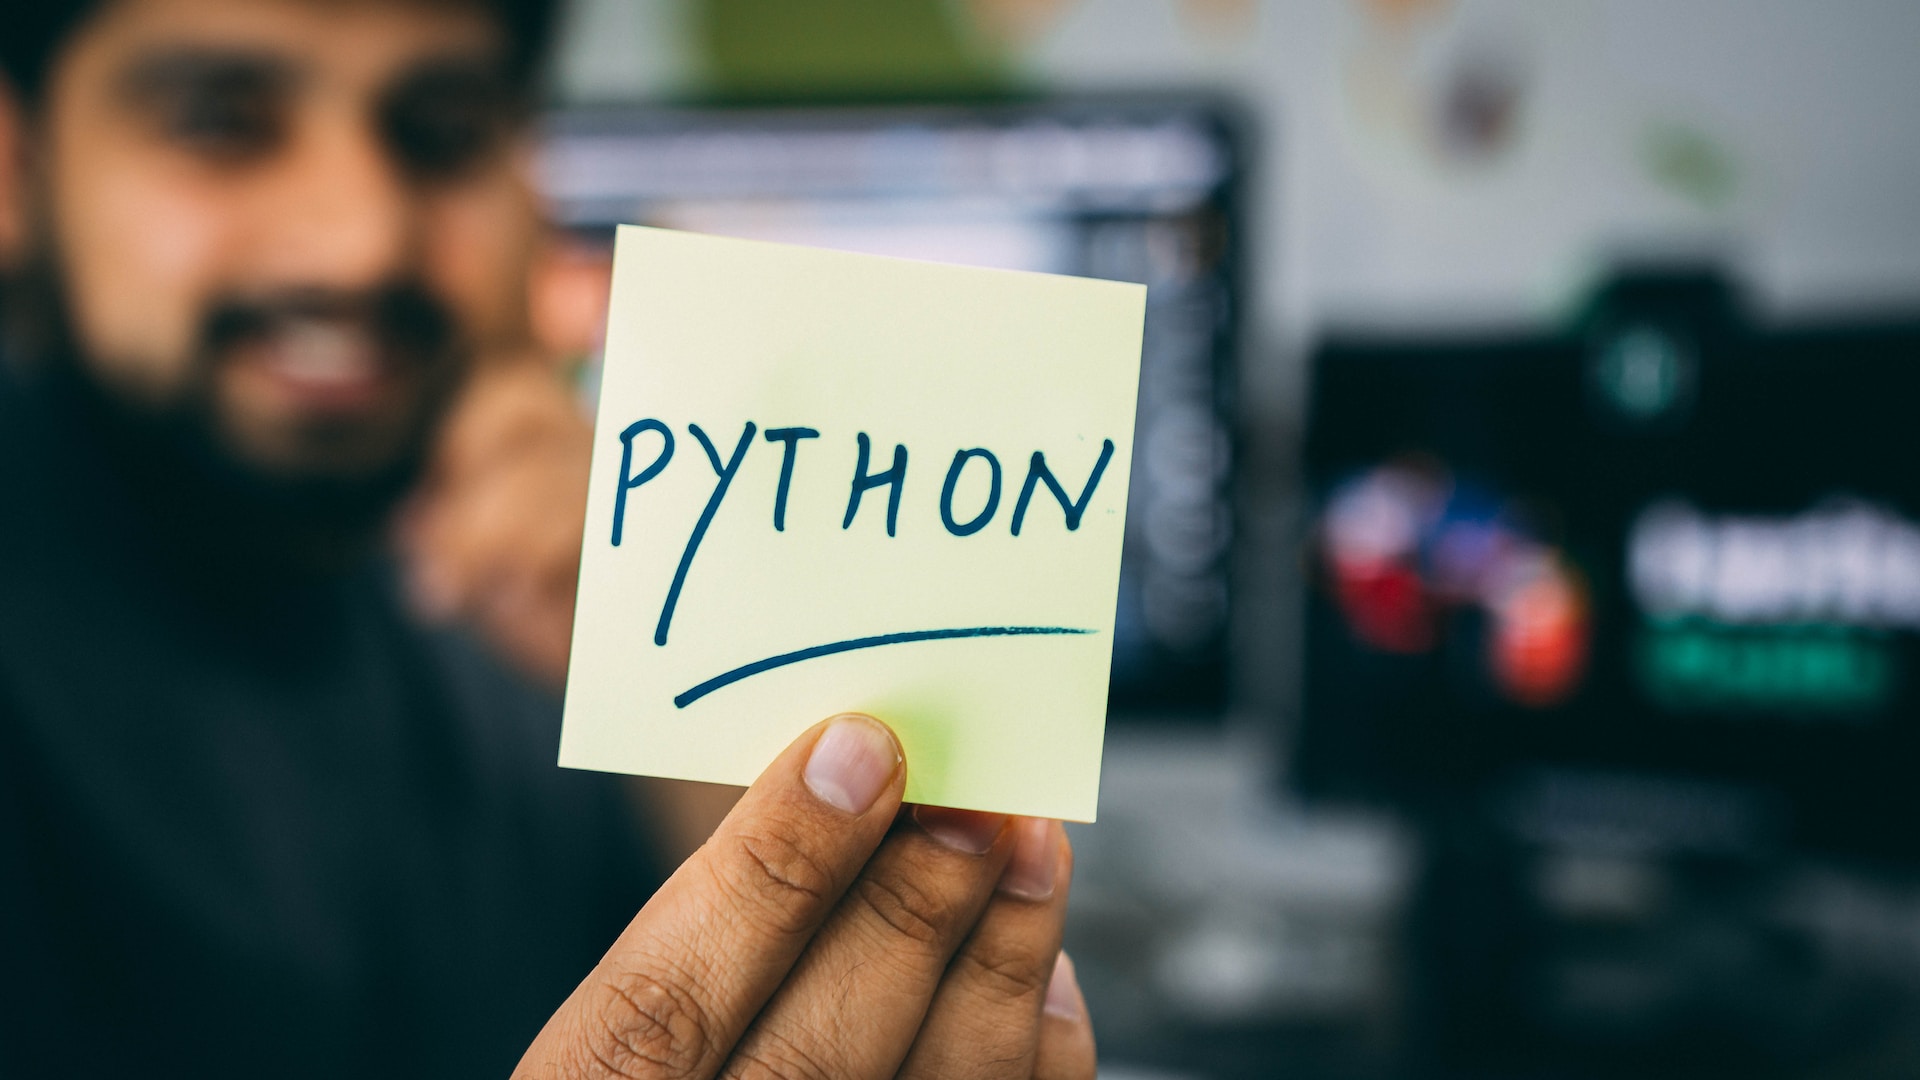 hitesh choudhary D9Zow2REm8U unsplash 1 Learn Best Advanced Python Machine Learning Course From One Team Solutions